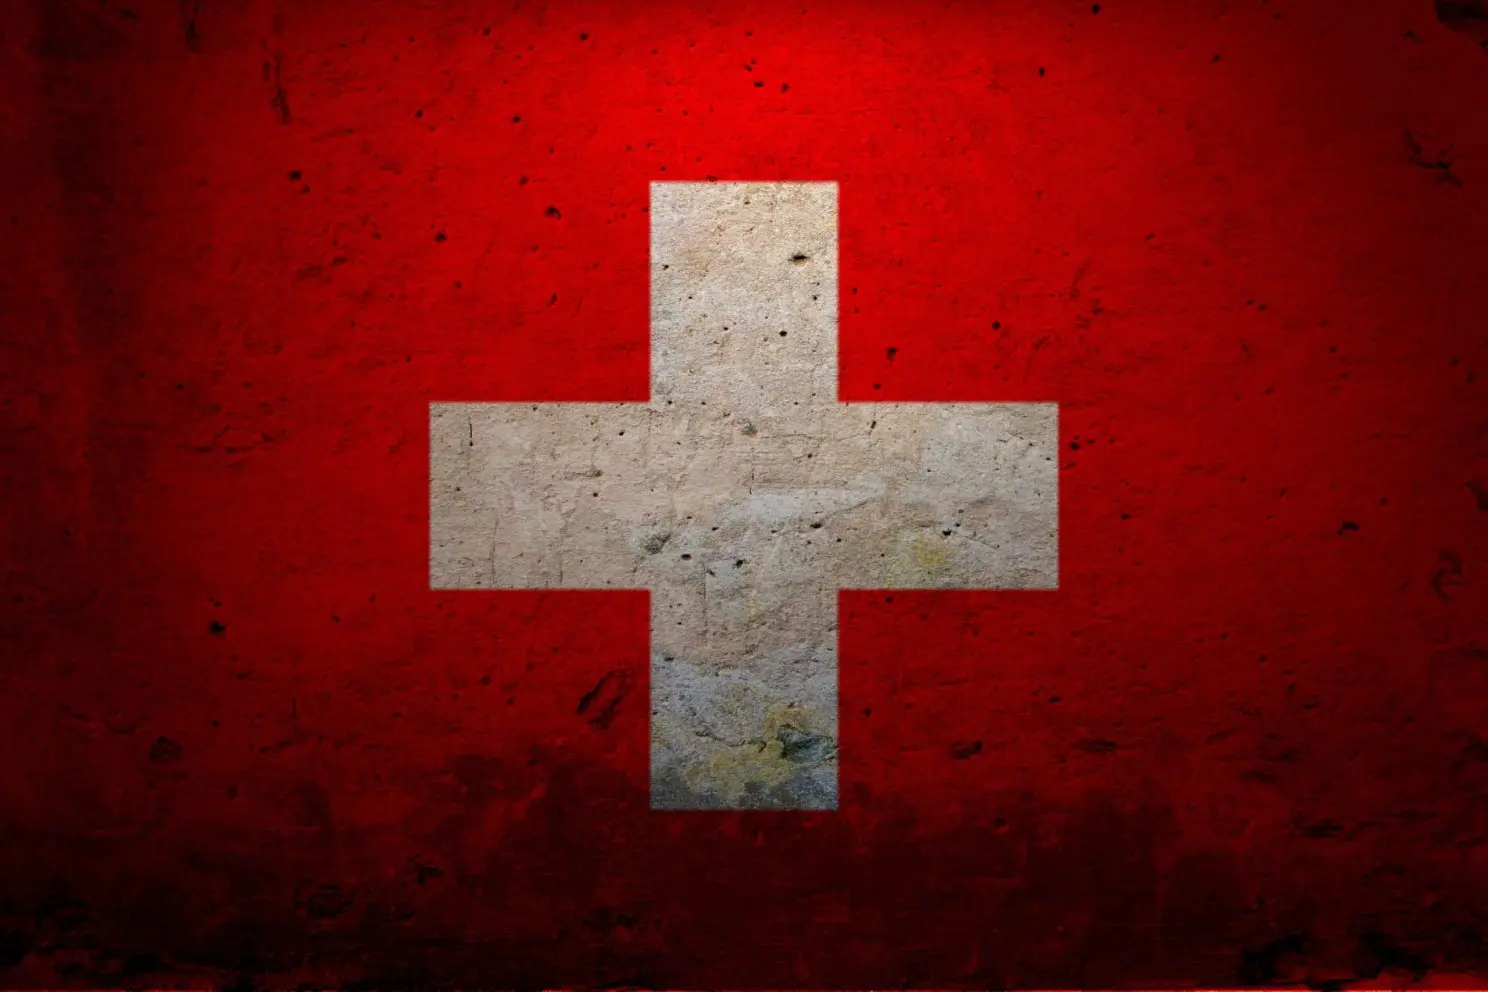 A white plus sign on a red background. This is a symbol for medicine.